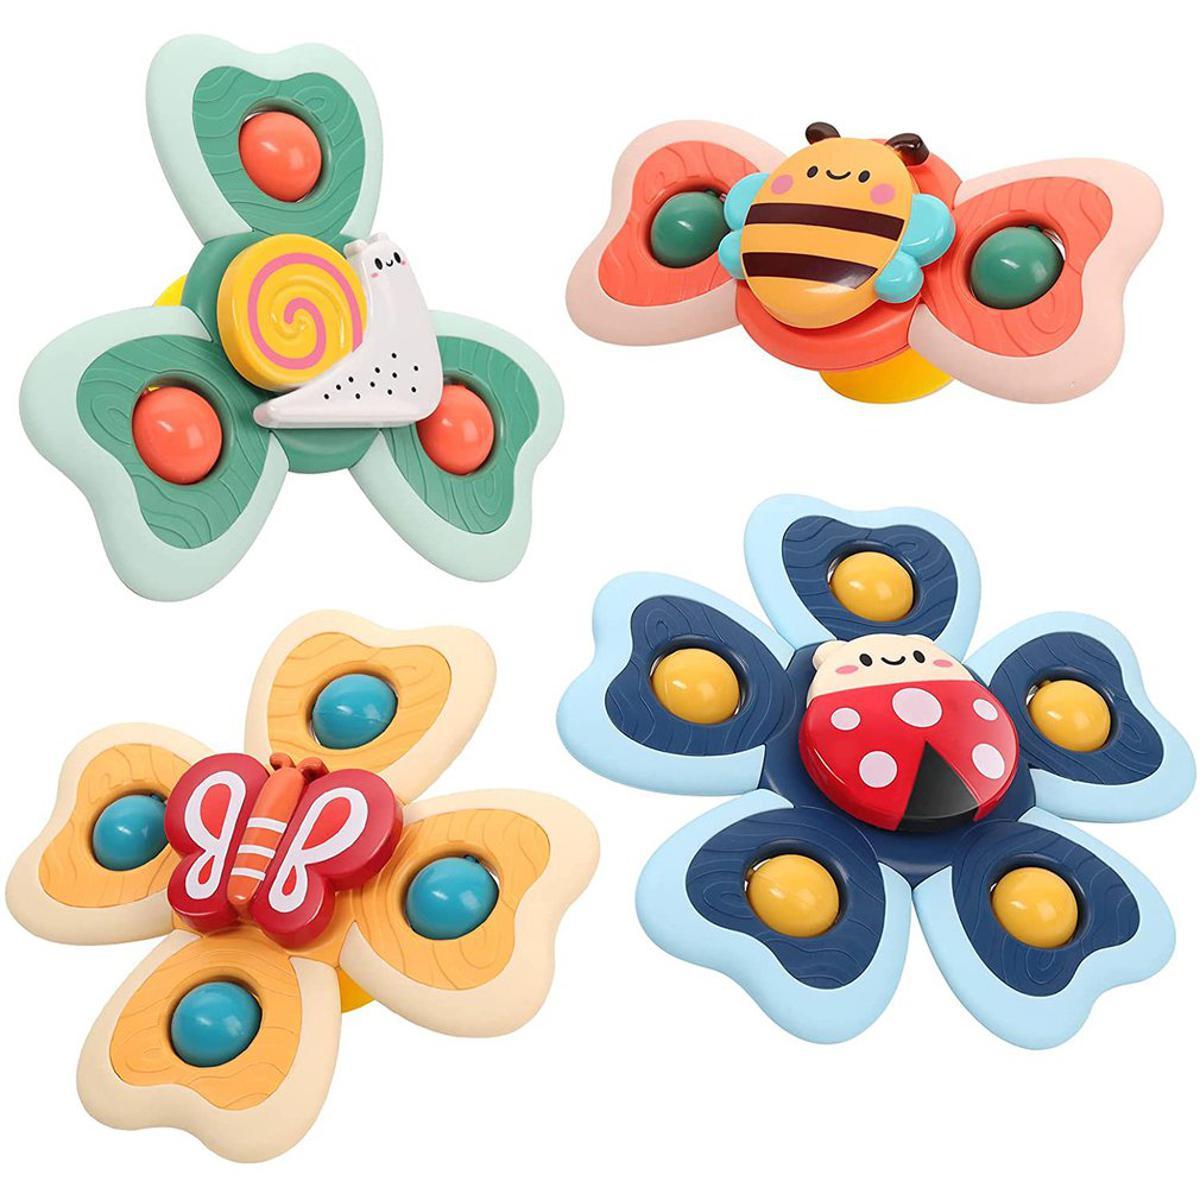 Children Suction Cup Turning Top Toys Stress Relief Sensory Toys For Toddlers